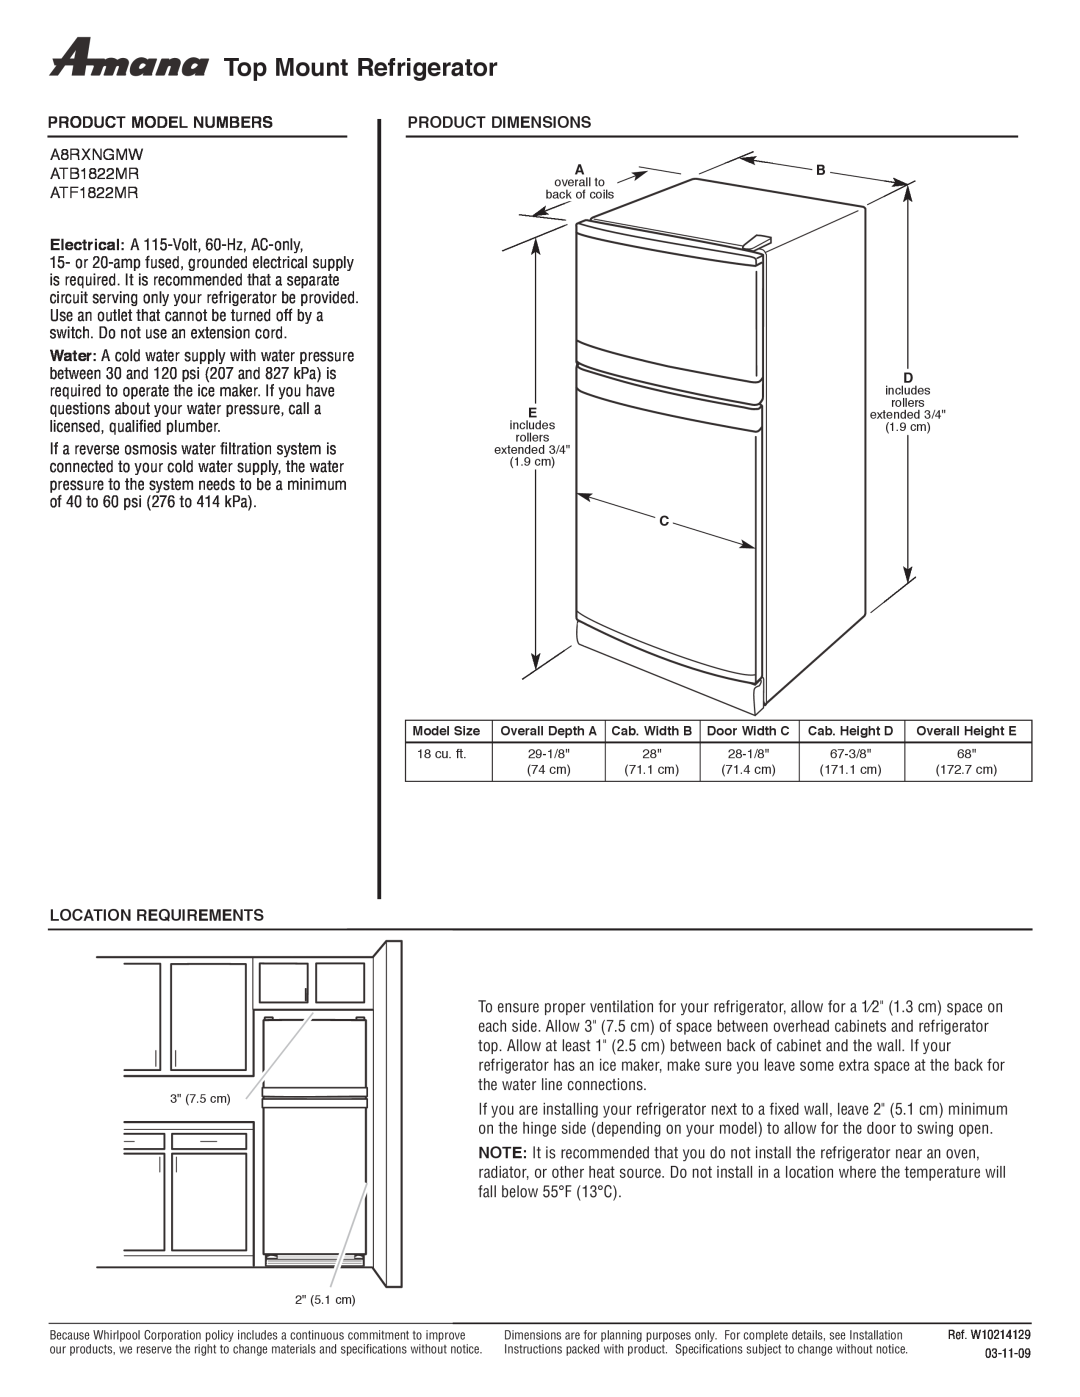 Amana A8RXNGMW dimensions Top Mount Refrigerator, Product Model Numbers, Product Dimensions, Location Requirements 